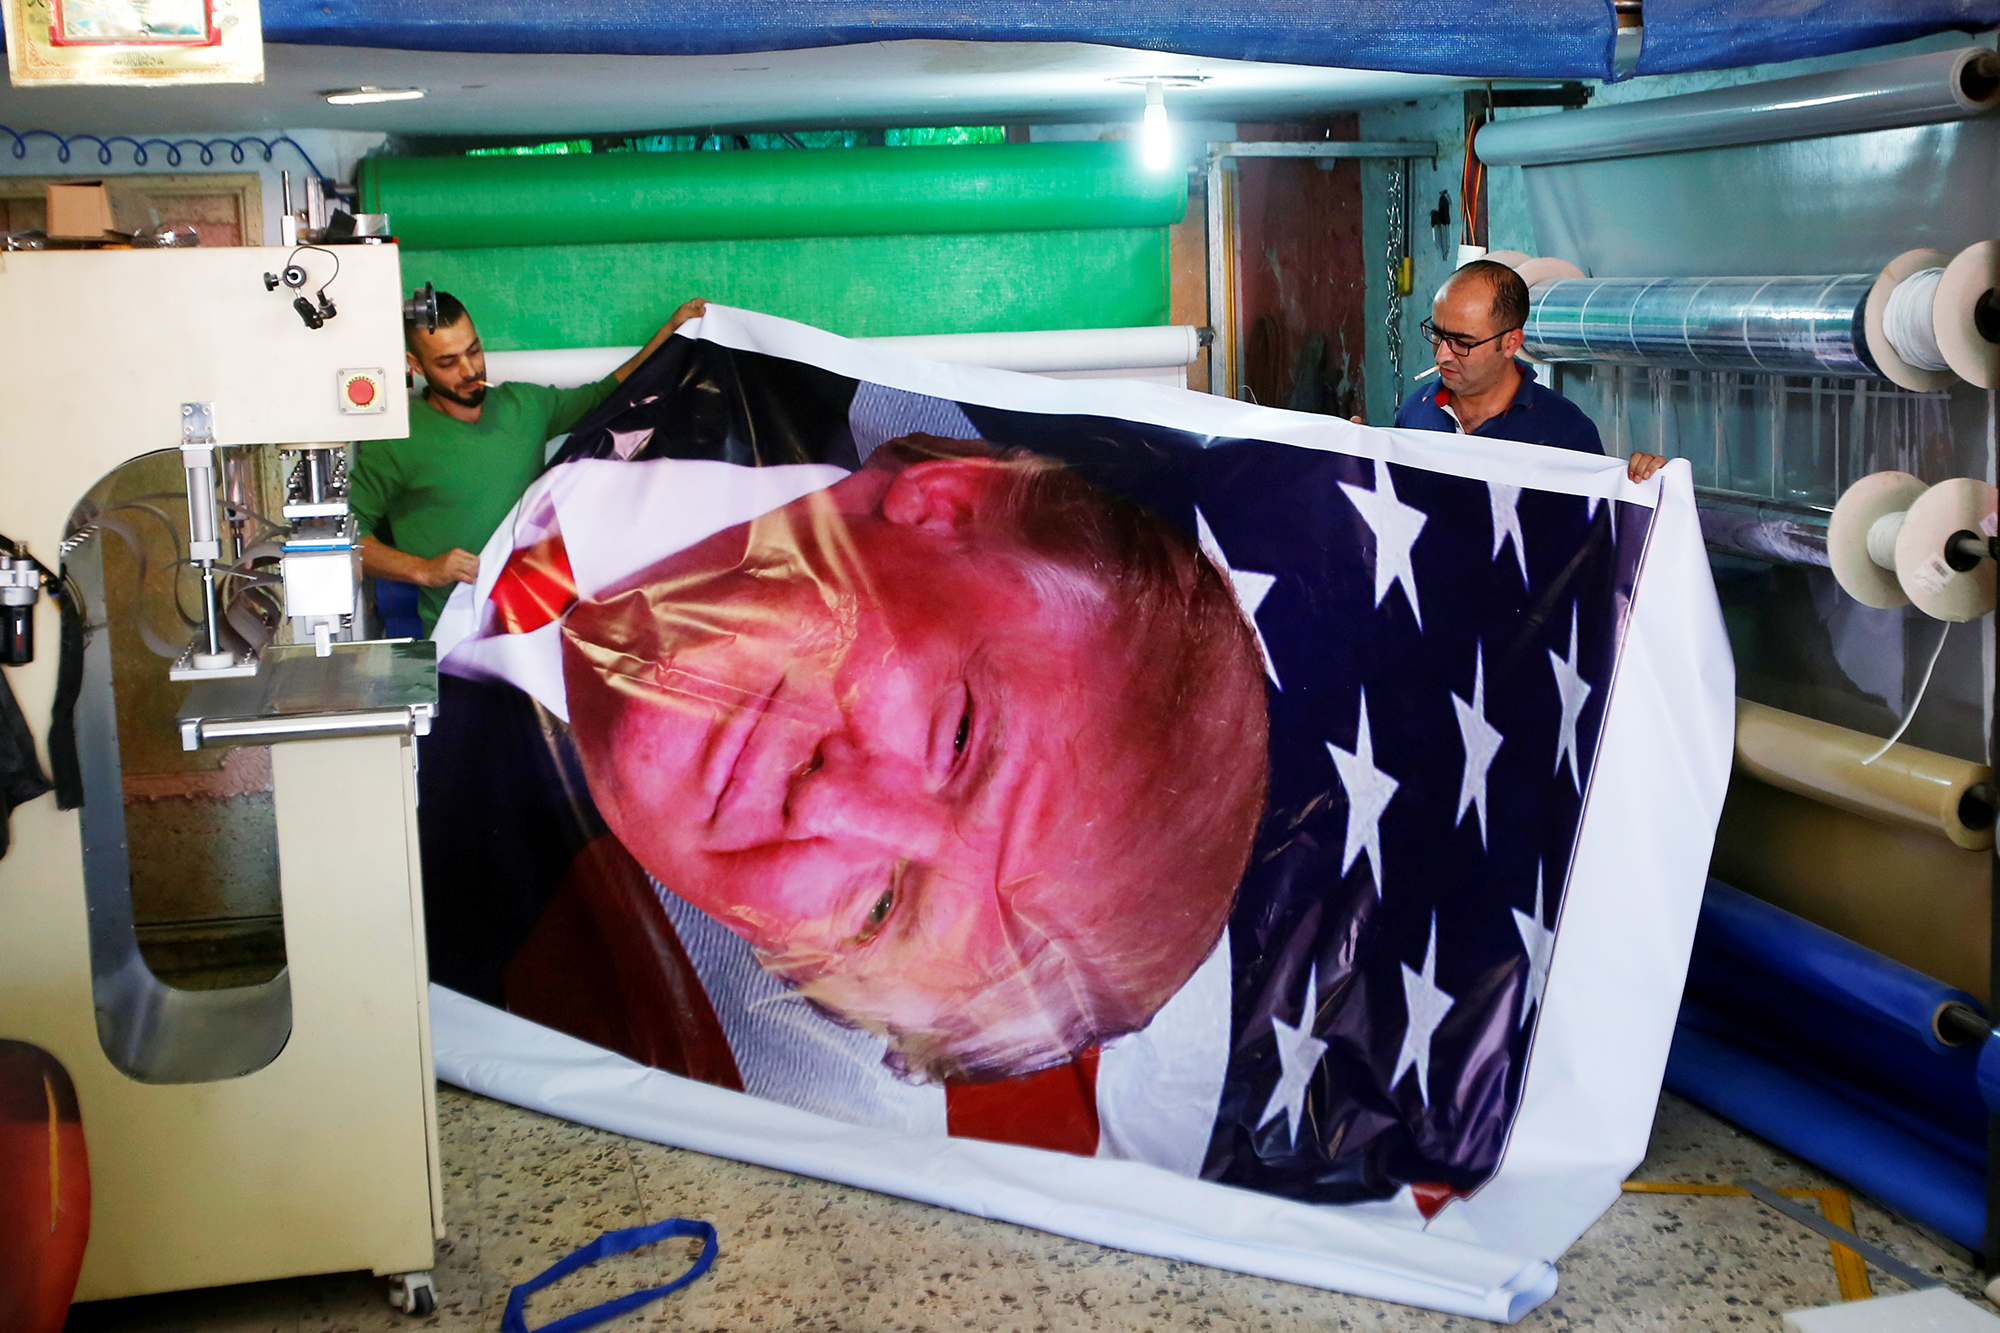 Palestinians print a poster depicting U.S. President Trump in preparations for his planned visit, in the West Bank town of Bethlehem